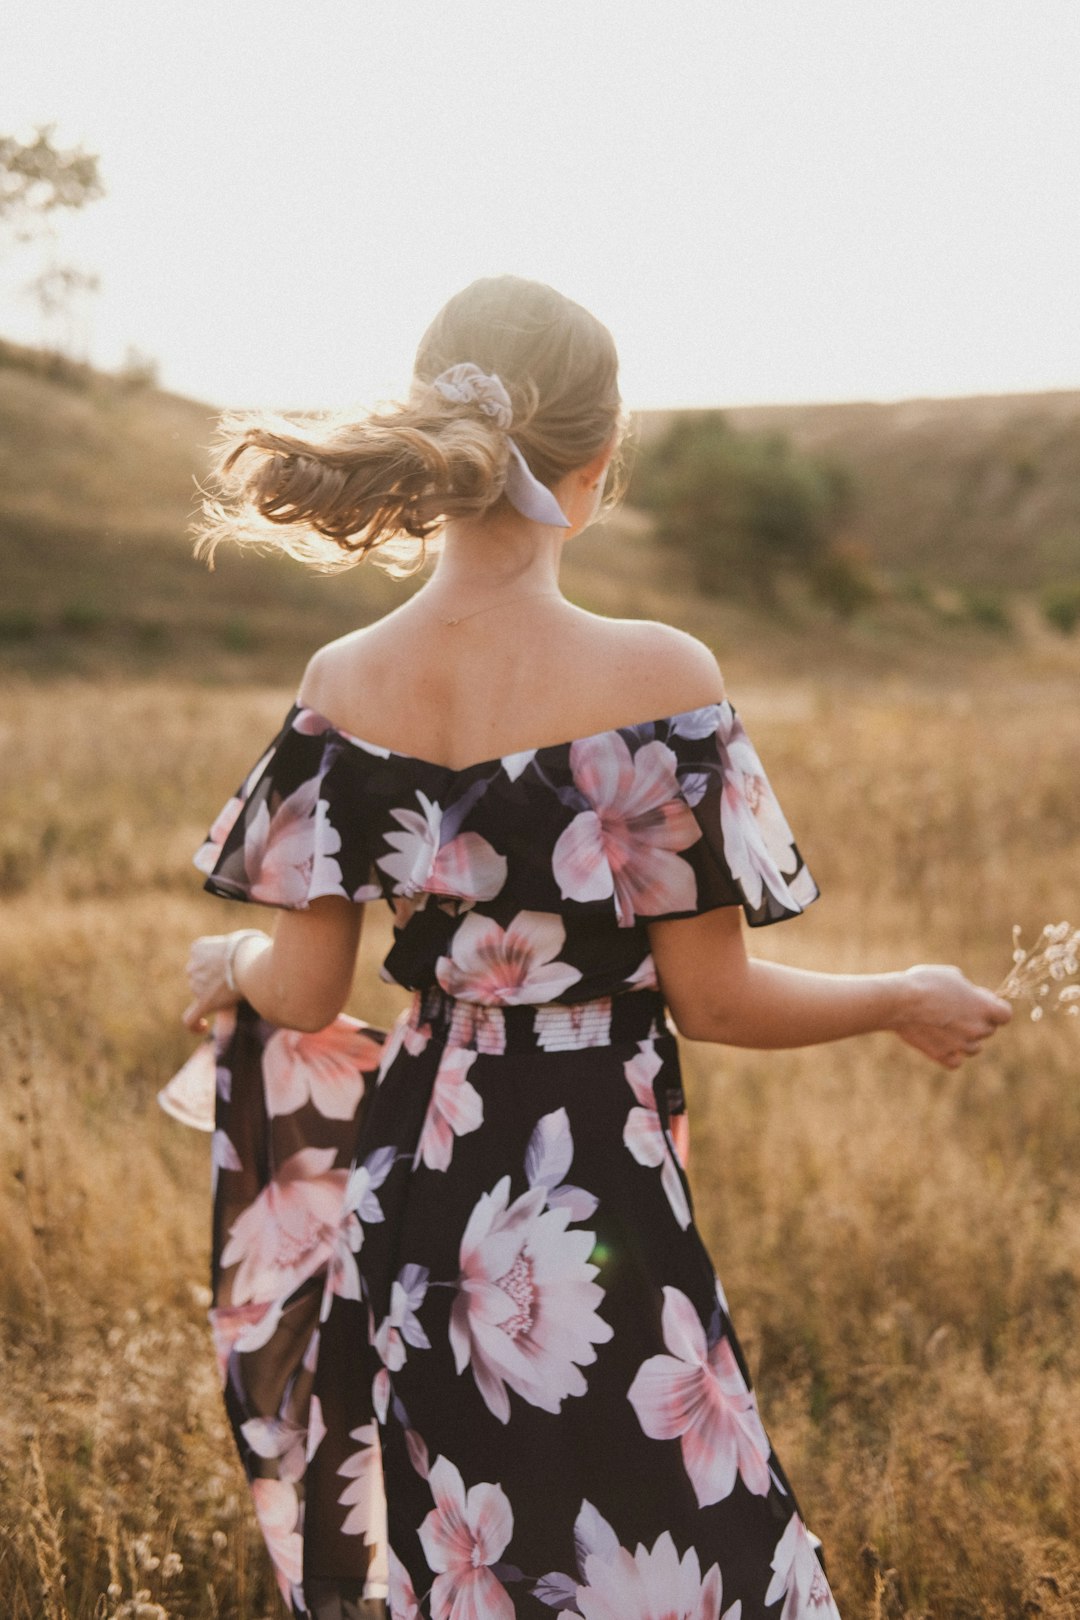 girl in black and pink floral dress standing on brown grass field during daytime